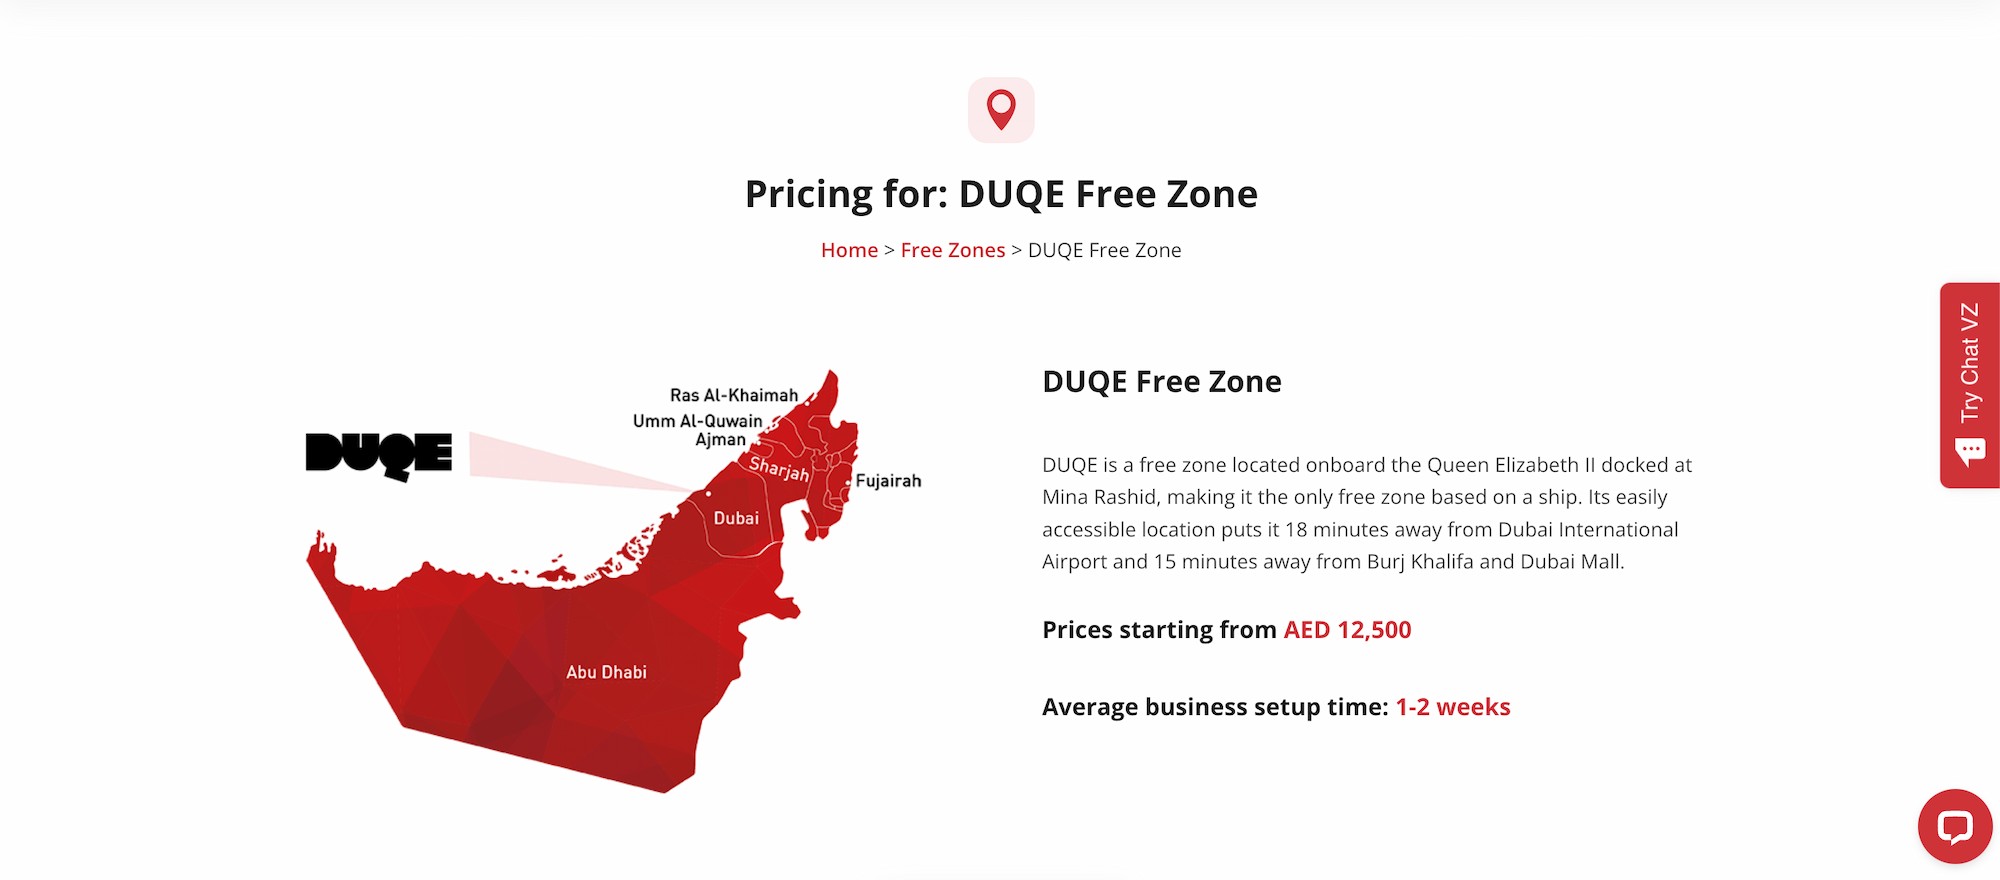 An overview and pricing information of the DUQE Free Zone.